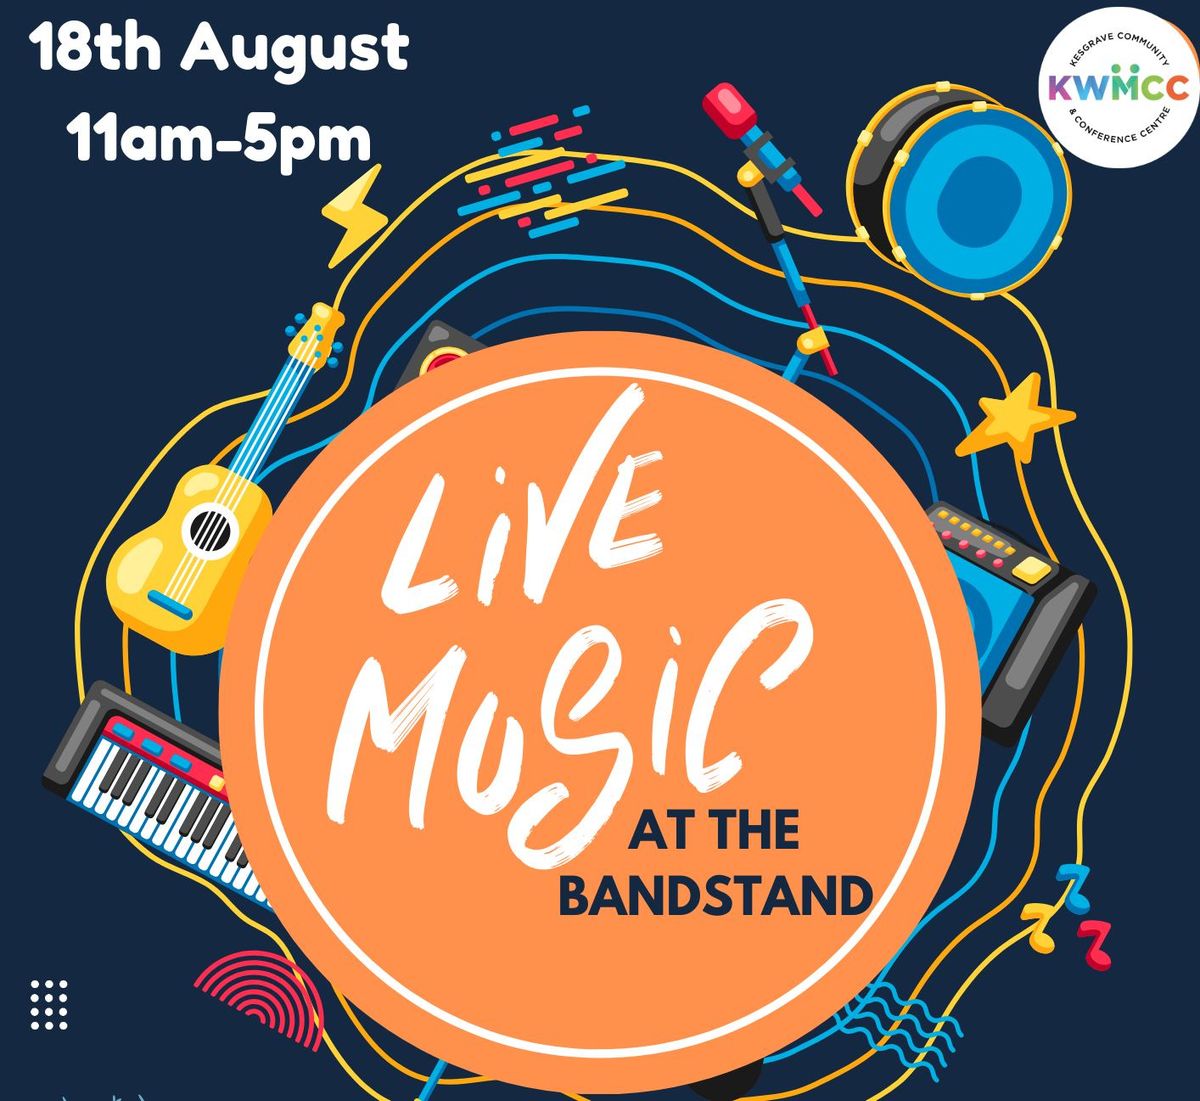 Live Music at the Bandstand